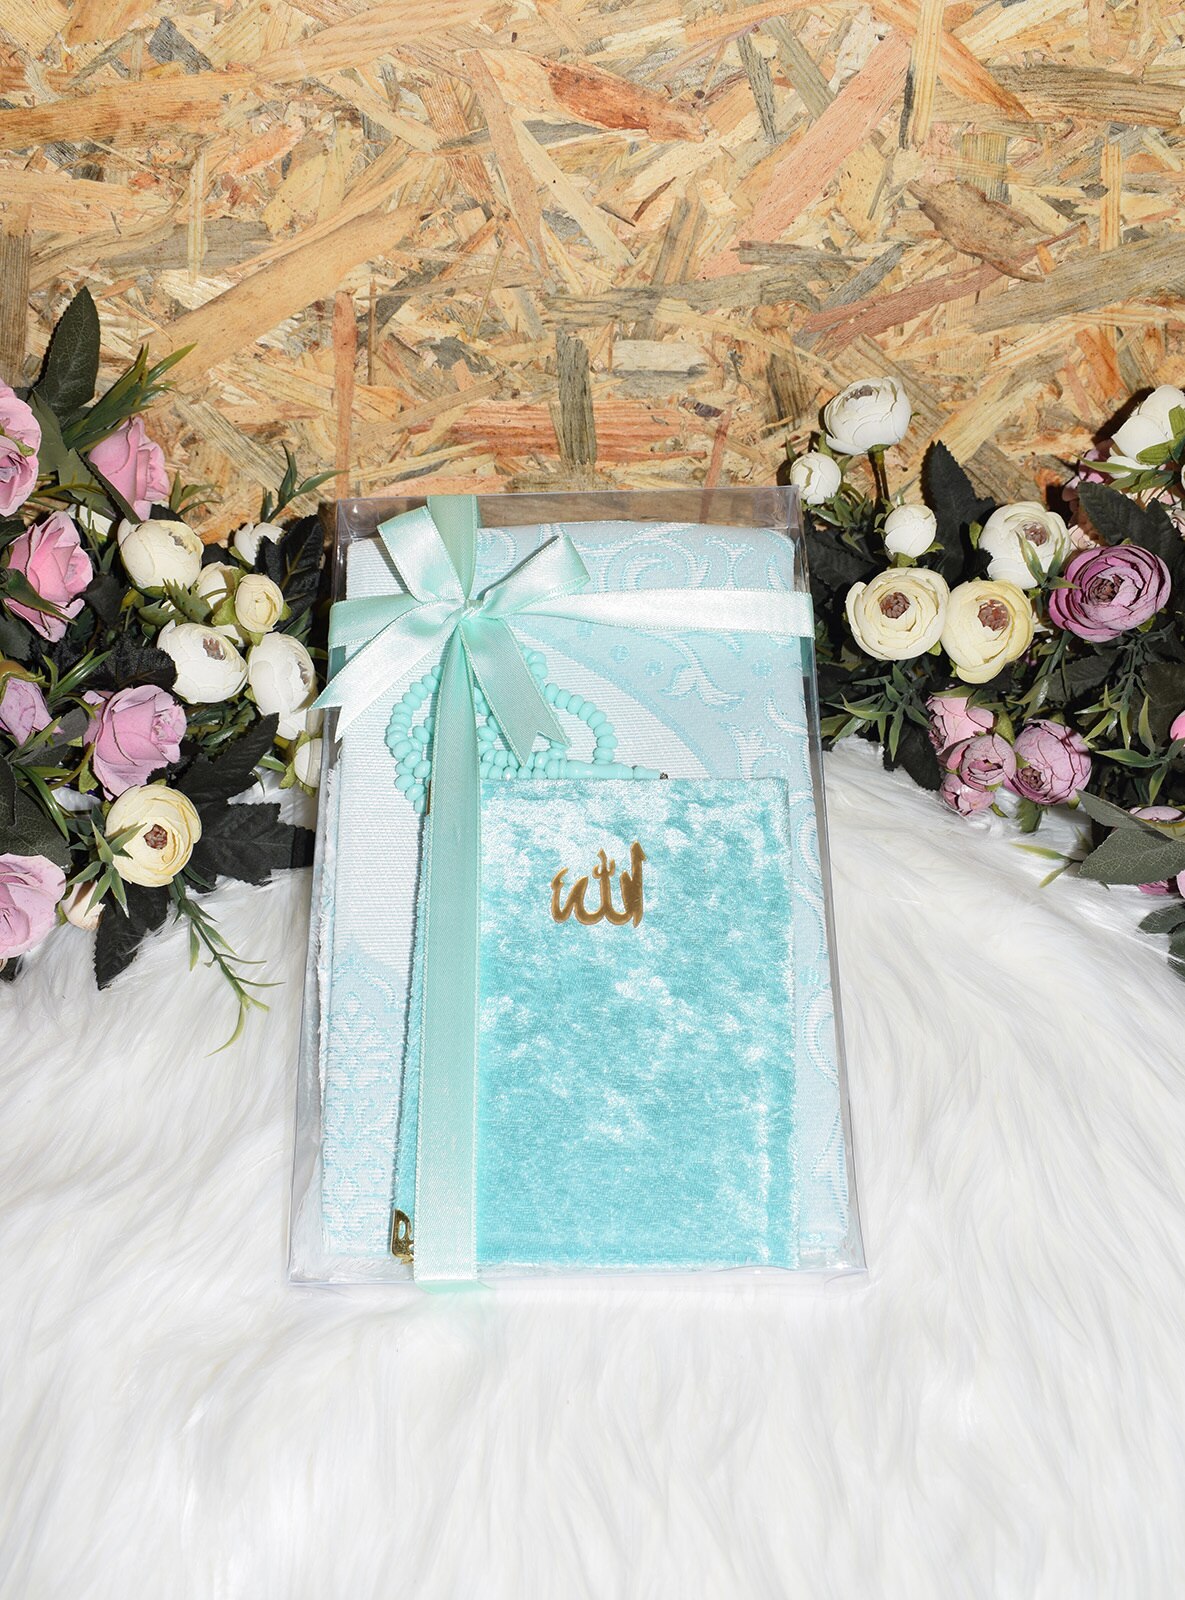 Mint green - Accessory Gift